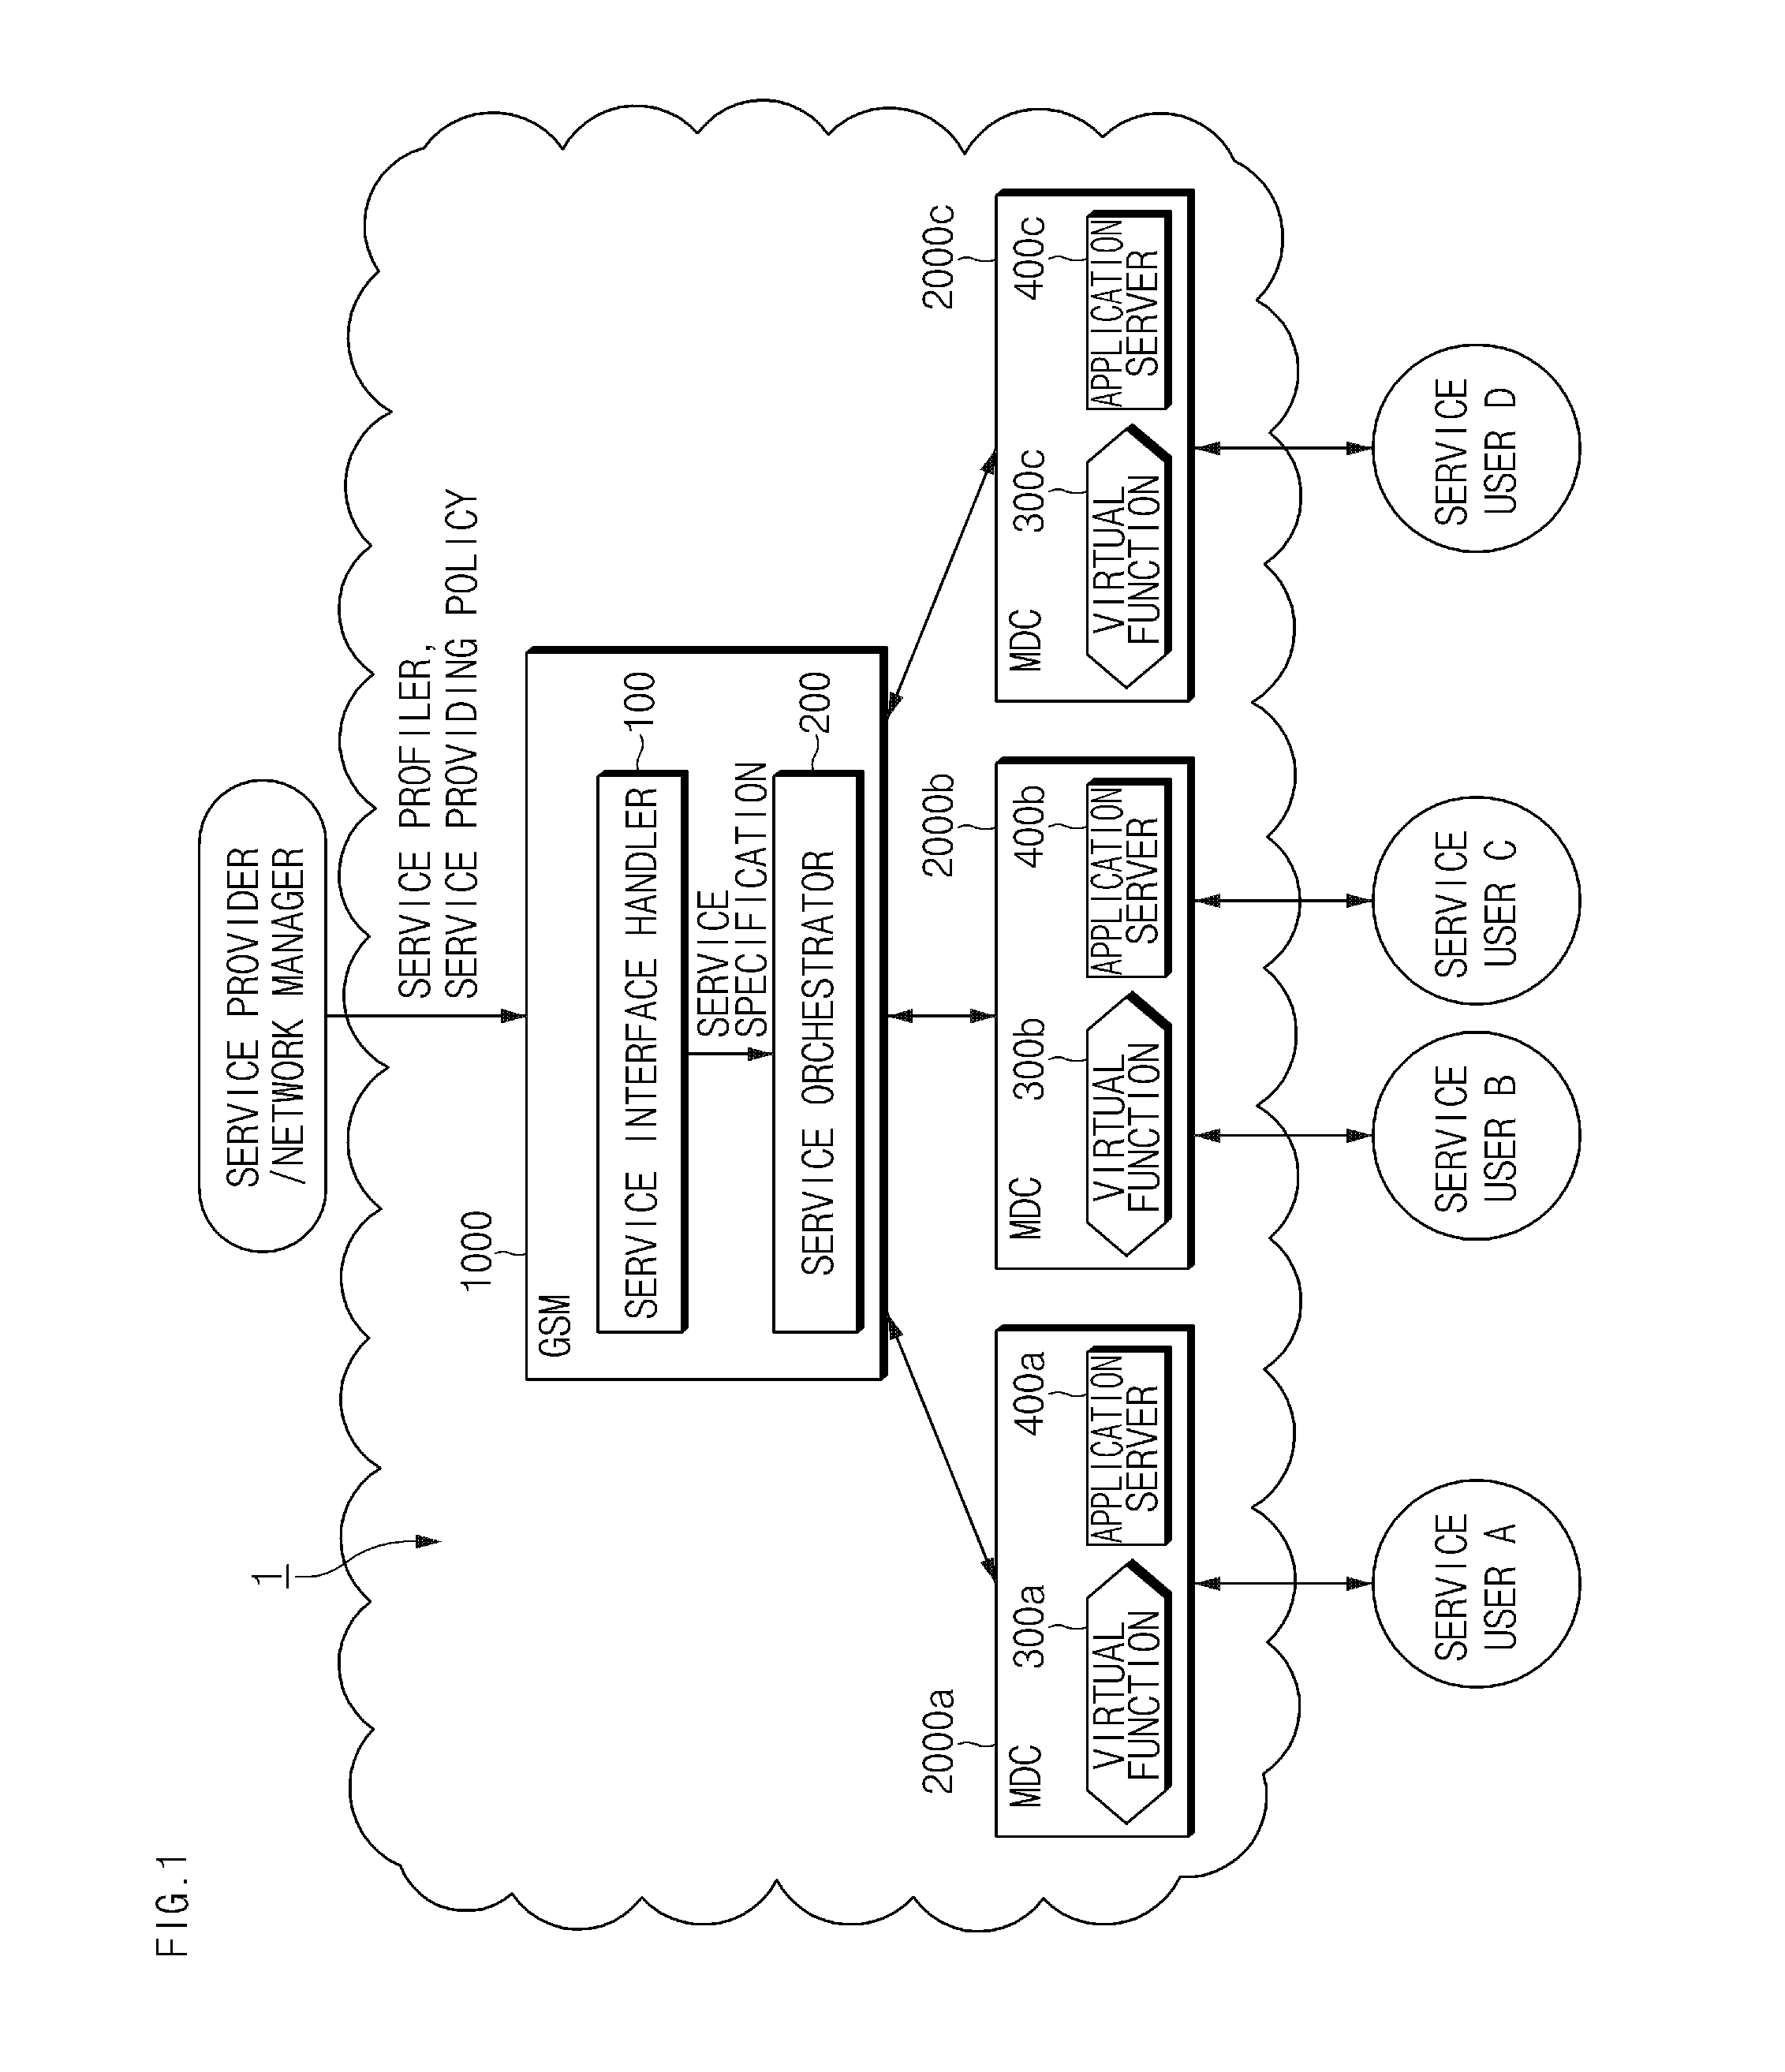 System and method for service orchestration in distributed cloud environment